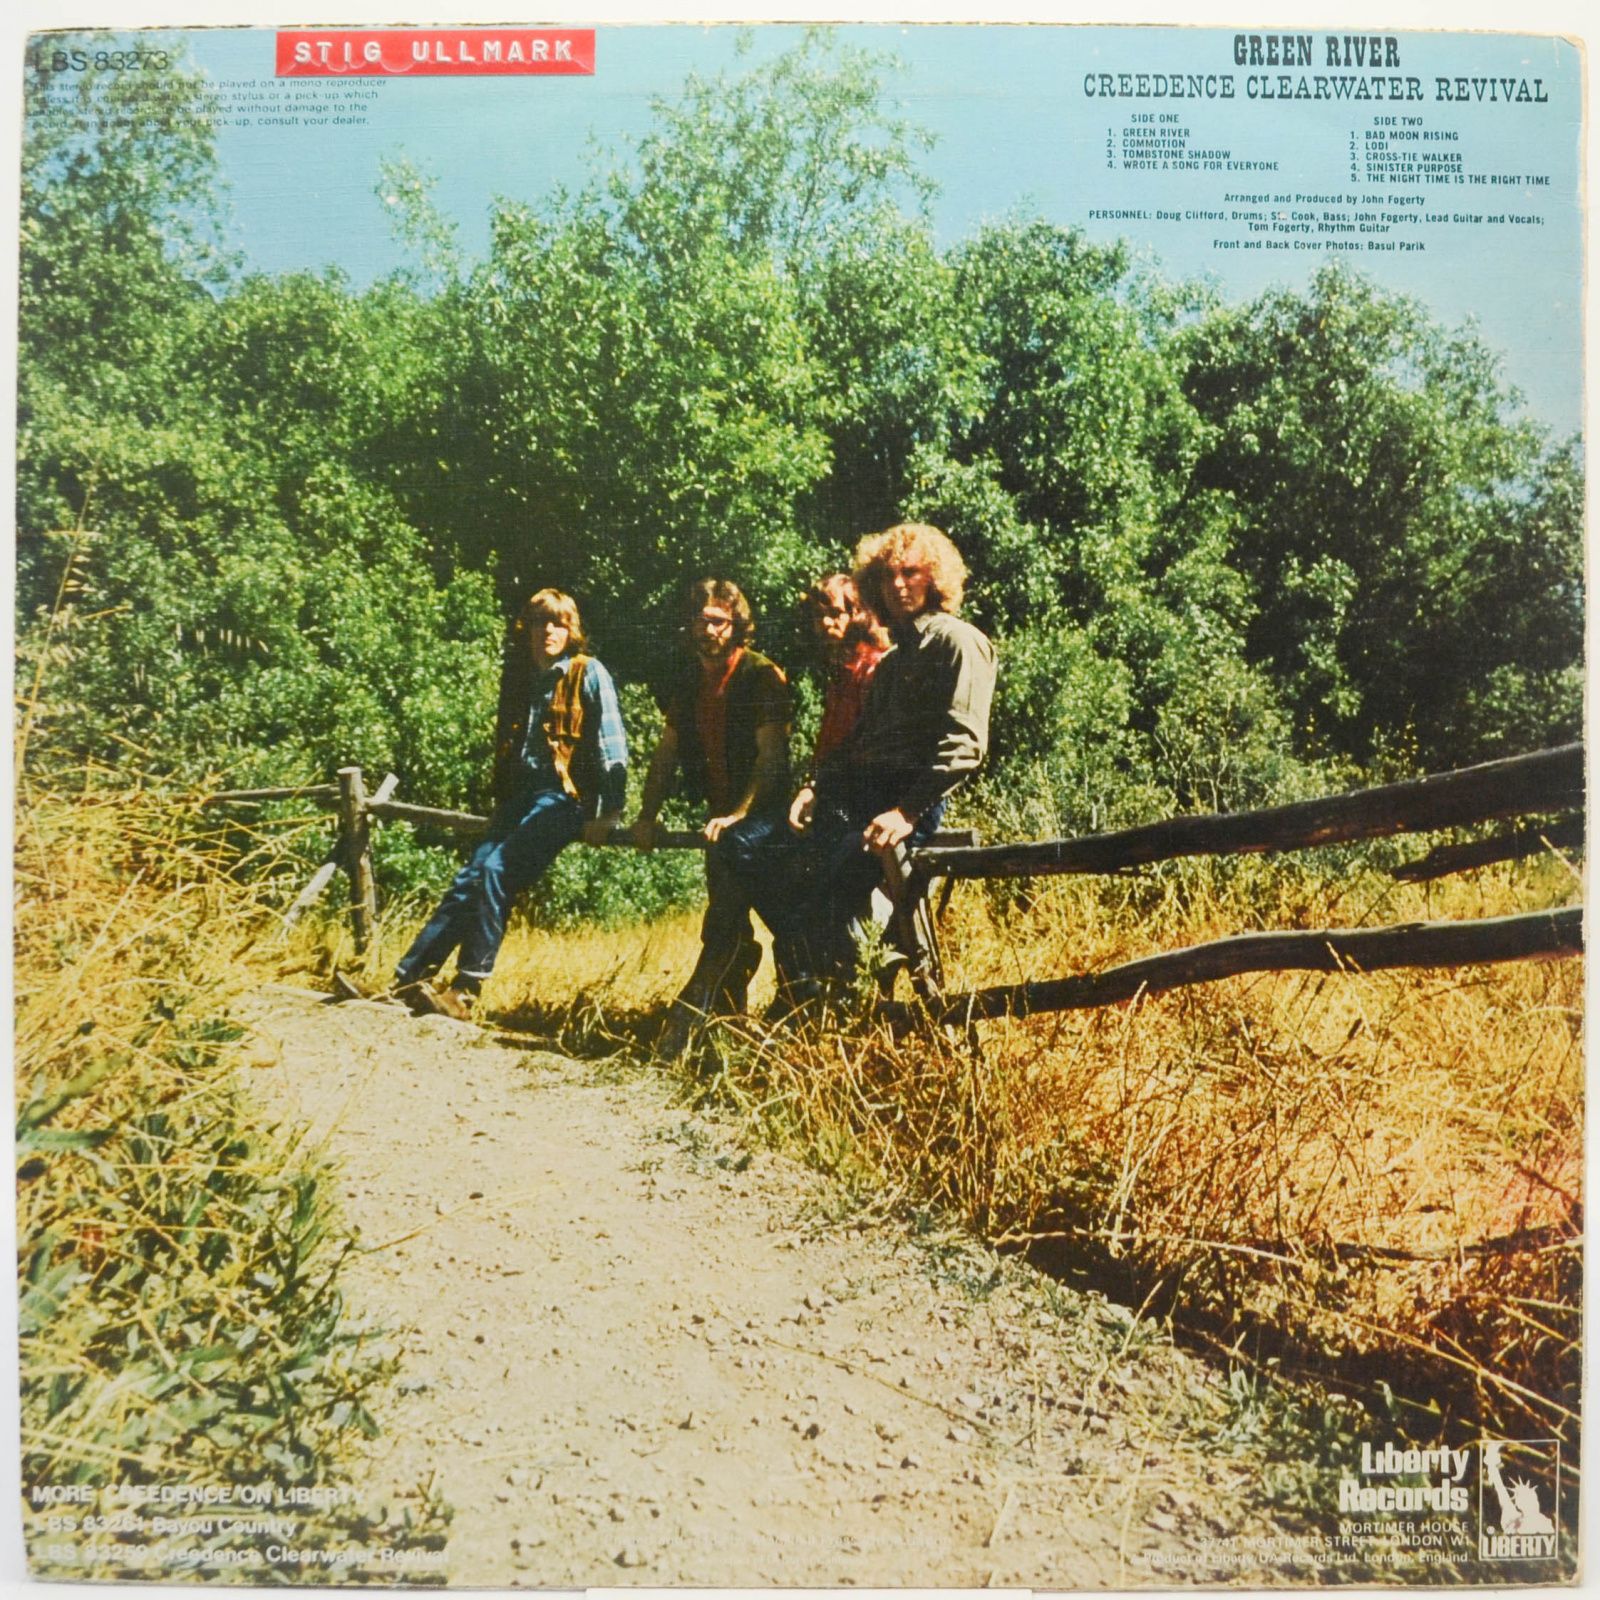 Creedence Clearwater Revival — Green River (UK), 1969